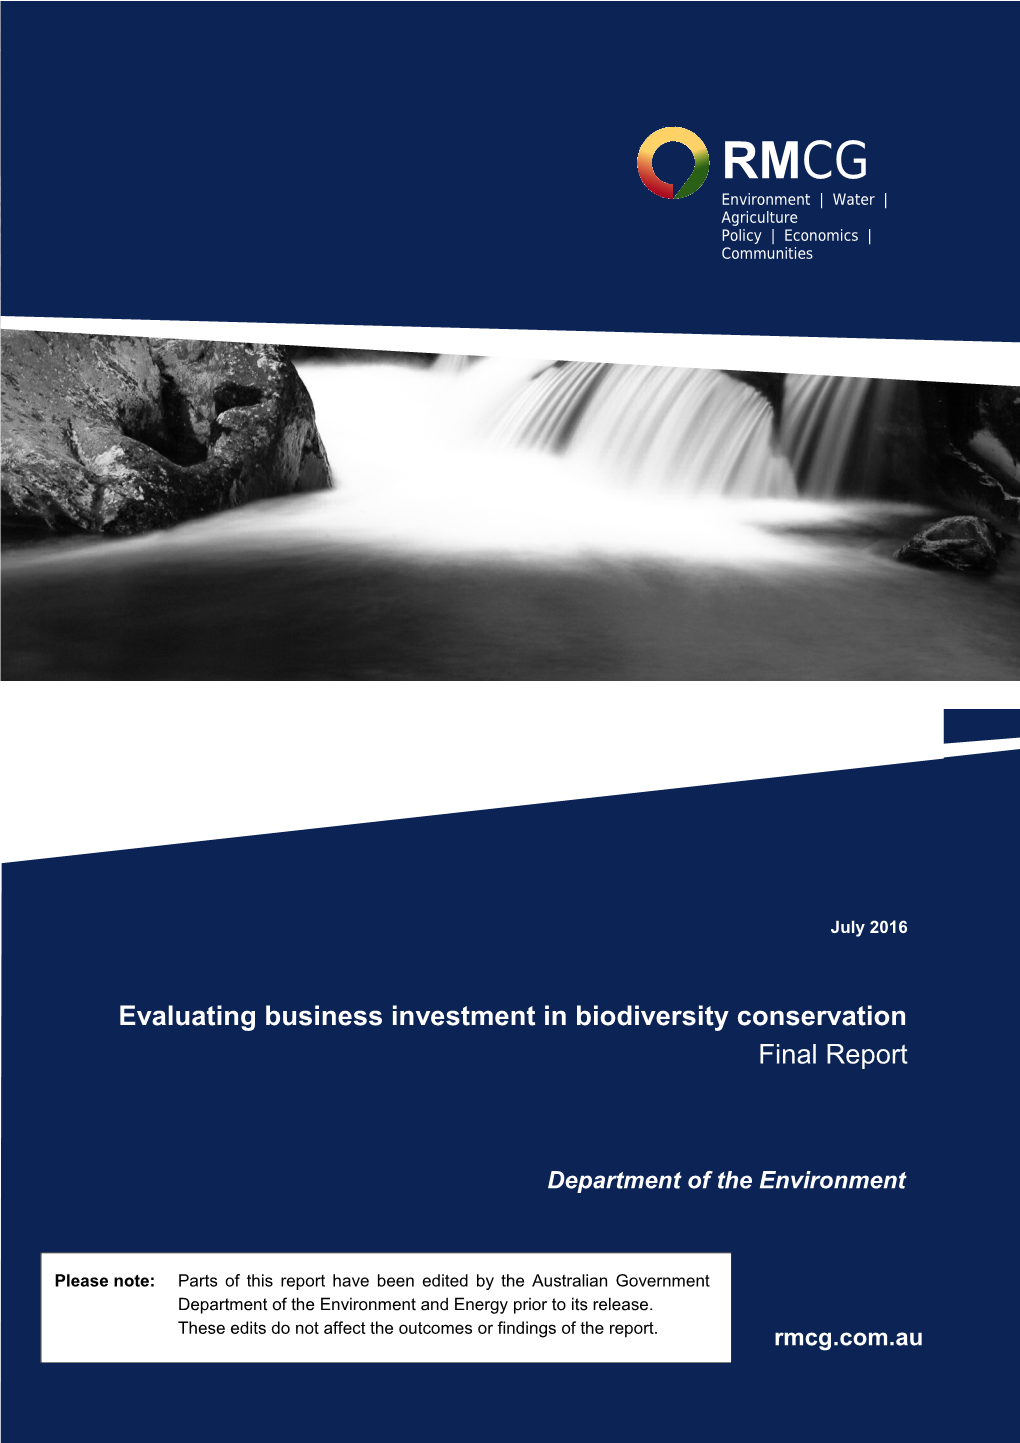 Evaluating Business Investment in Biodiversity Conservation Final Report